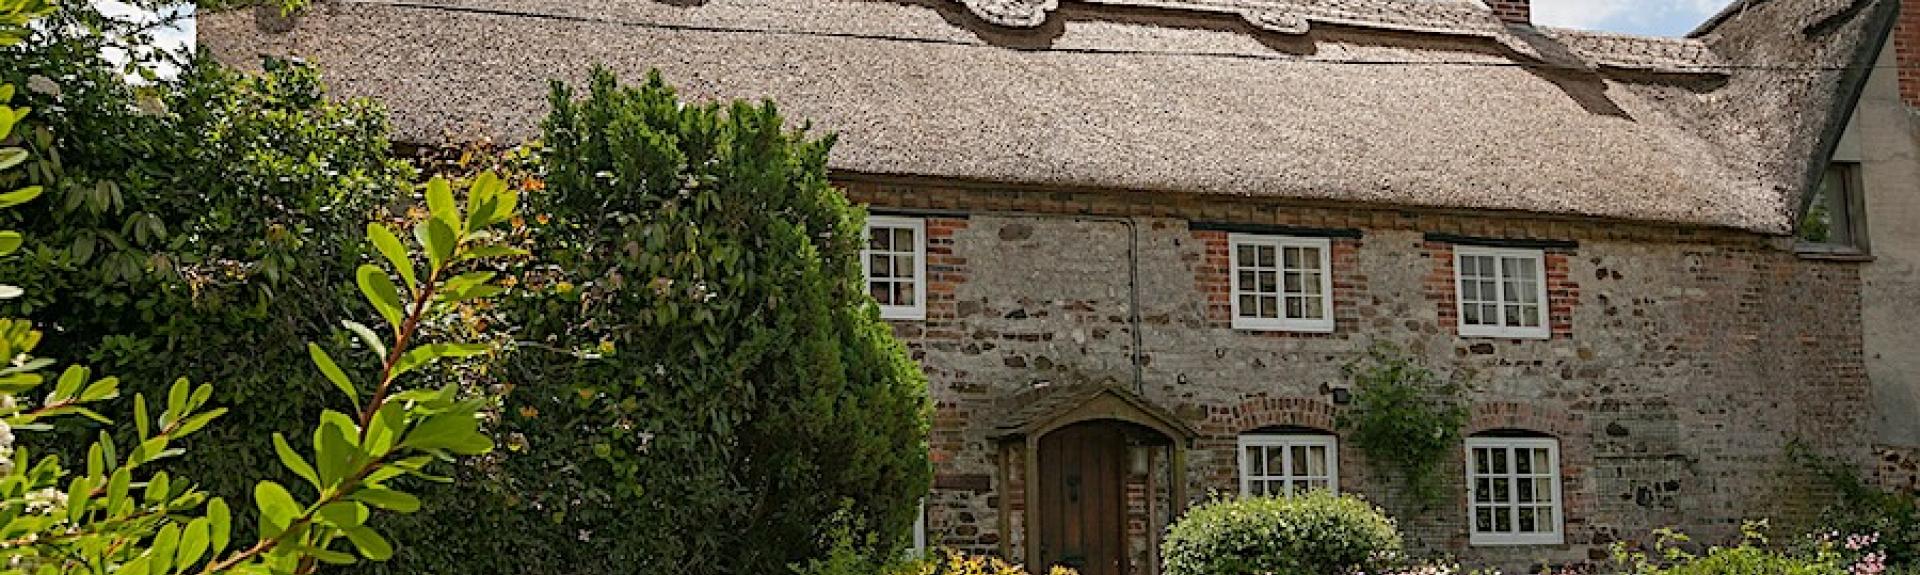 Exterior of a thatched holiday cottage in Dorset with a flower-filled garden.